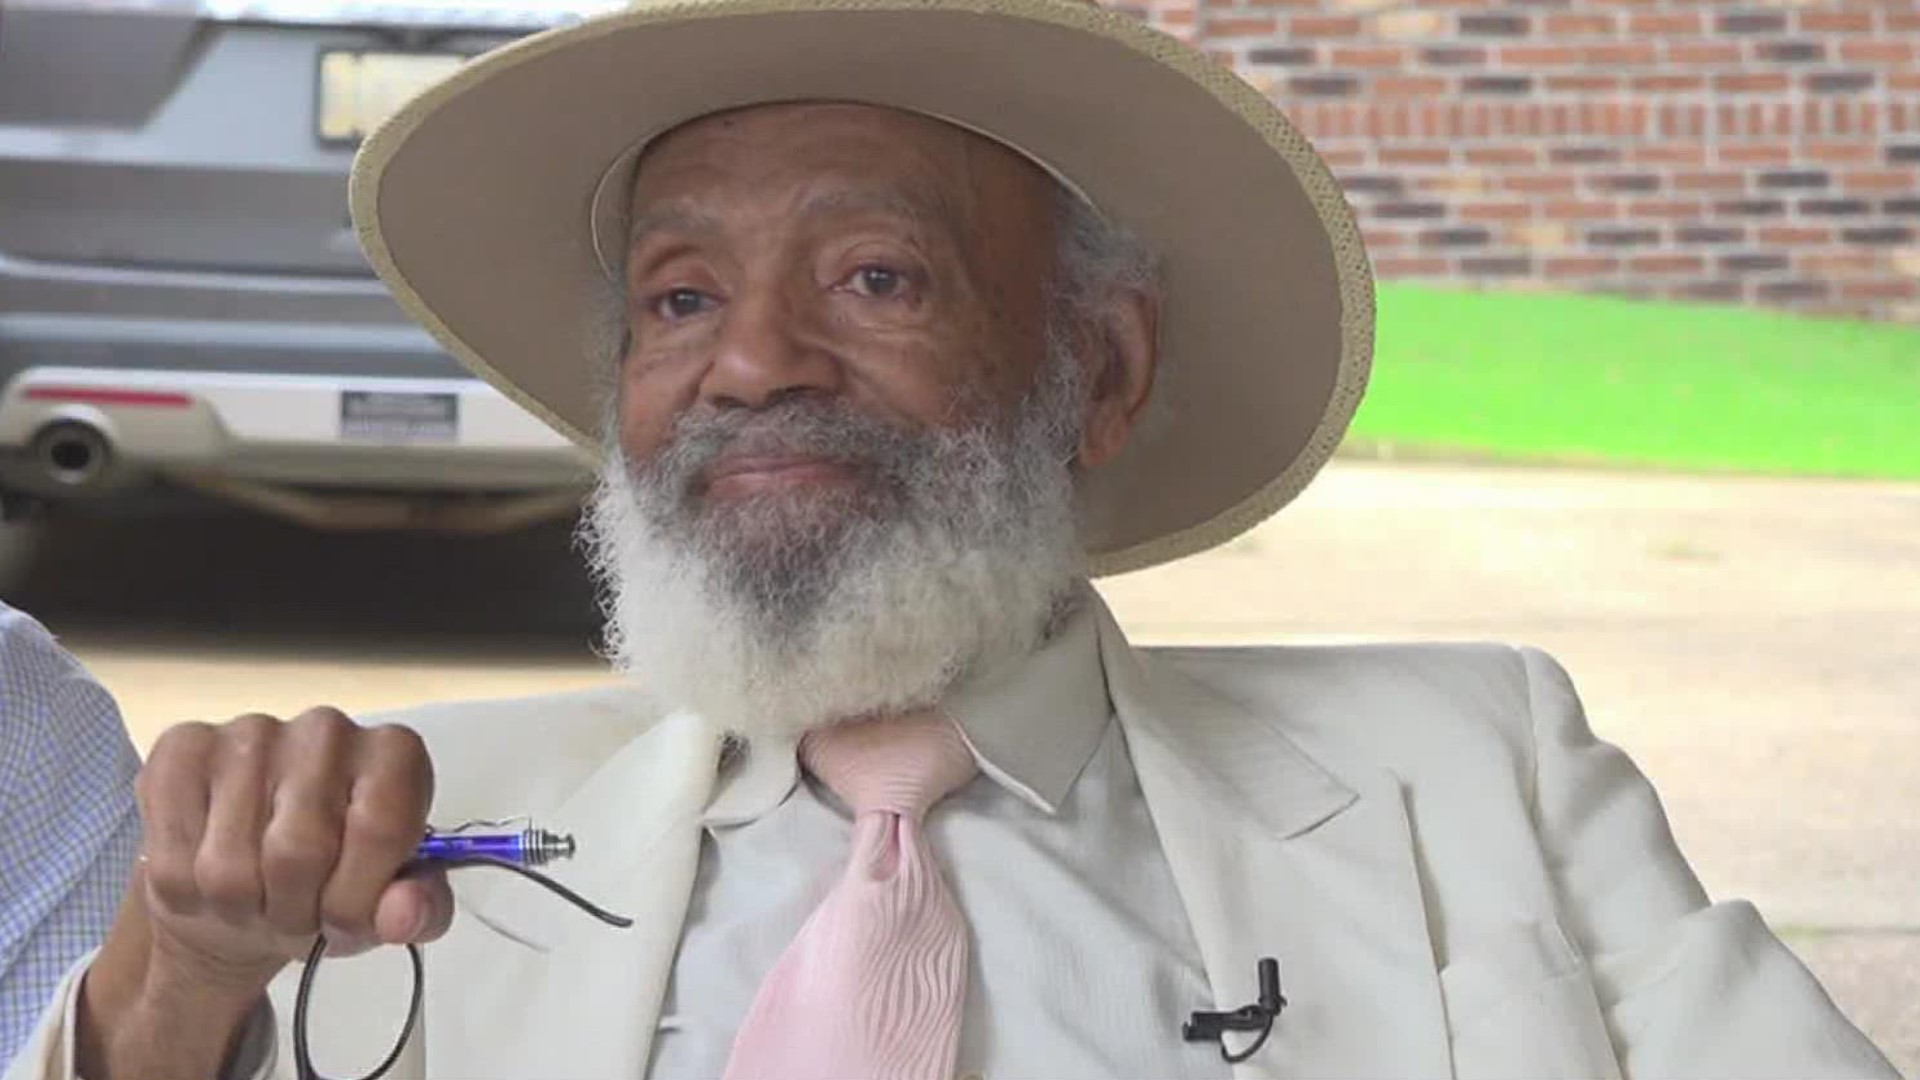 James Meredith was the first Black student at Ole Miss and now he wants to teach the Ten Commandments and the Golden Rule to those who will listen.